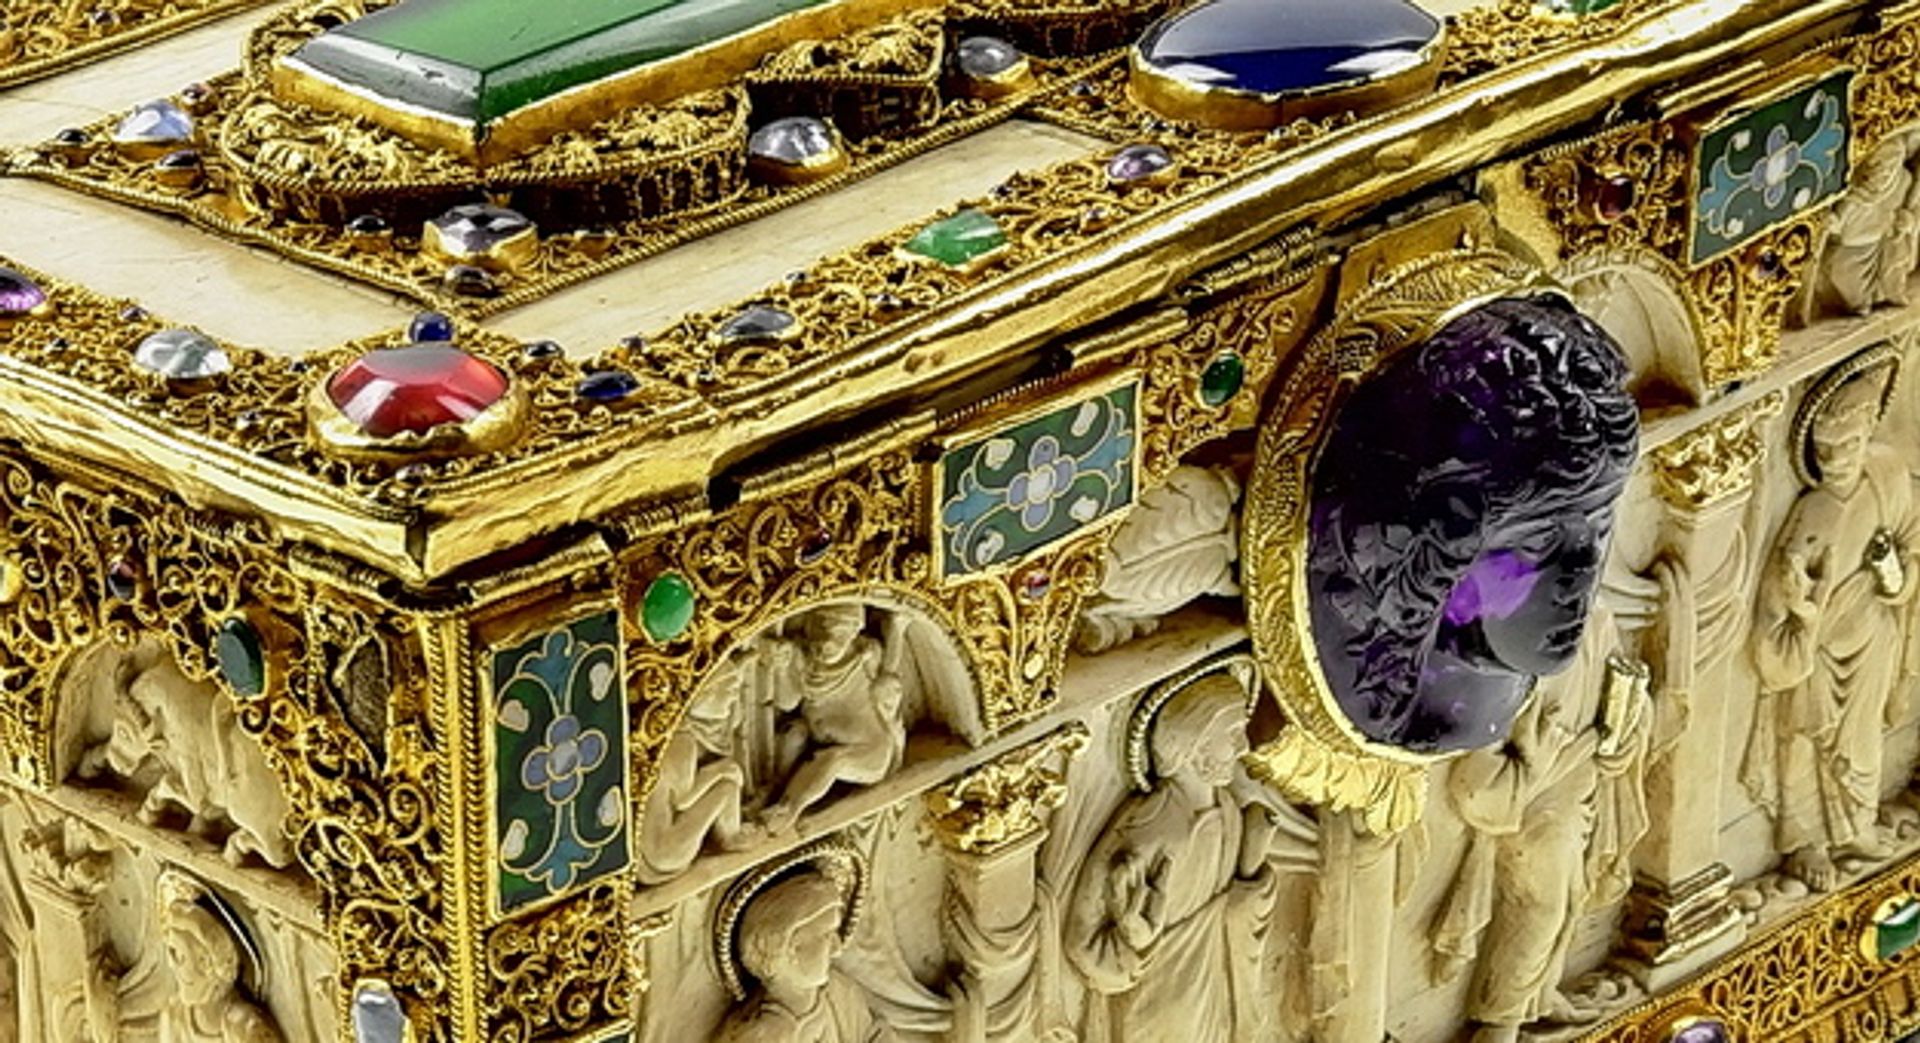 A reliquary inlaid with ivory, gold and gemstones from the church of St Servatius treasury in Quedlinburg Photo: Domschatz Quedlinburg